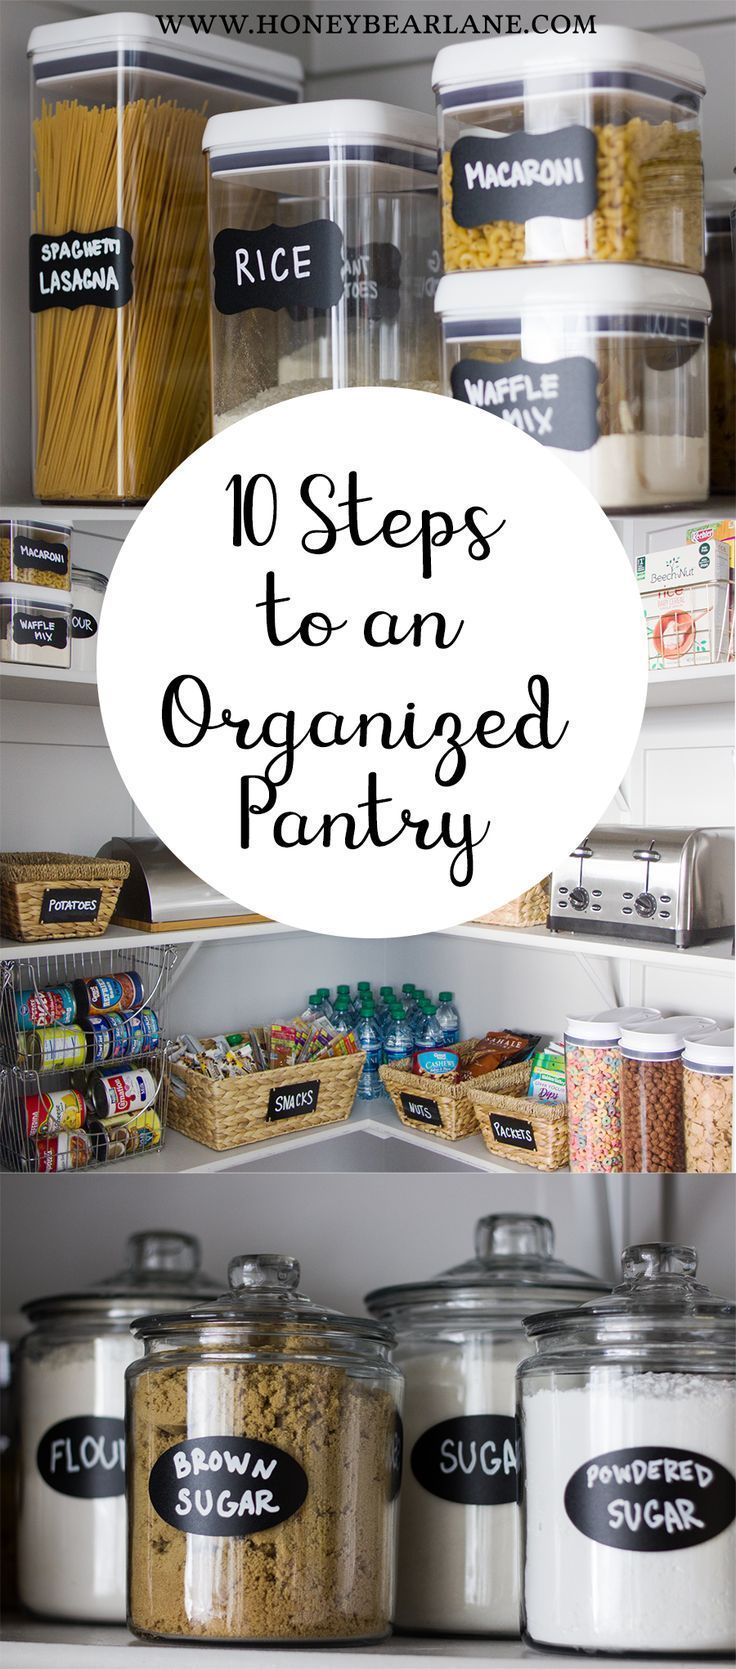 Pantry organization in 10 easy steps #ad